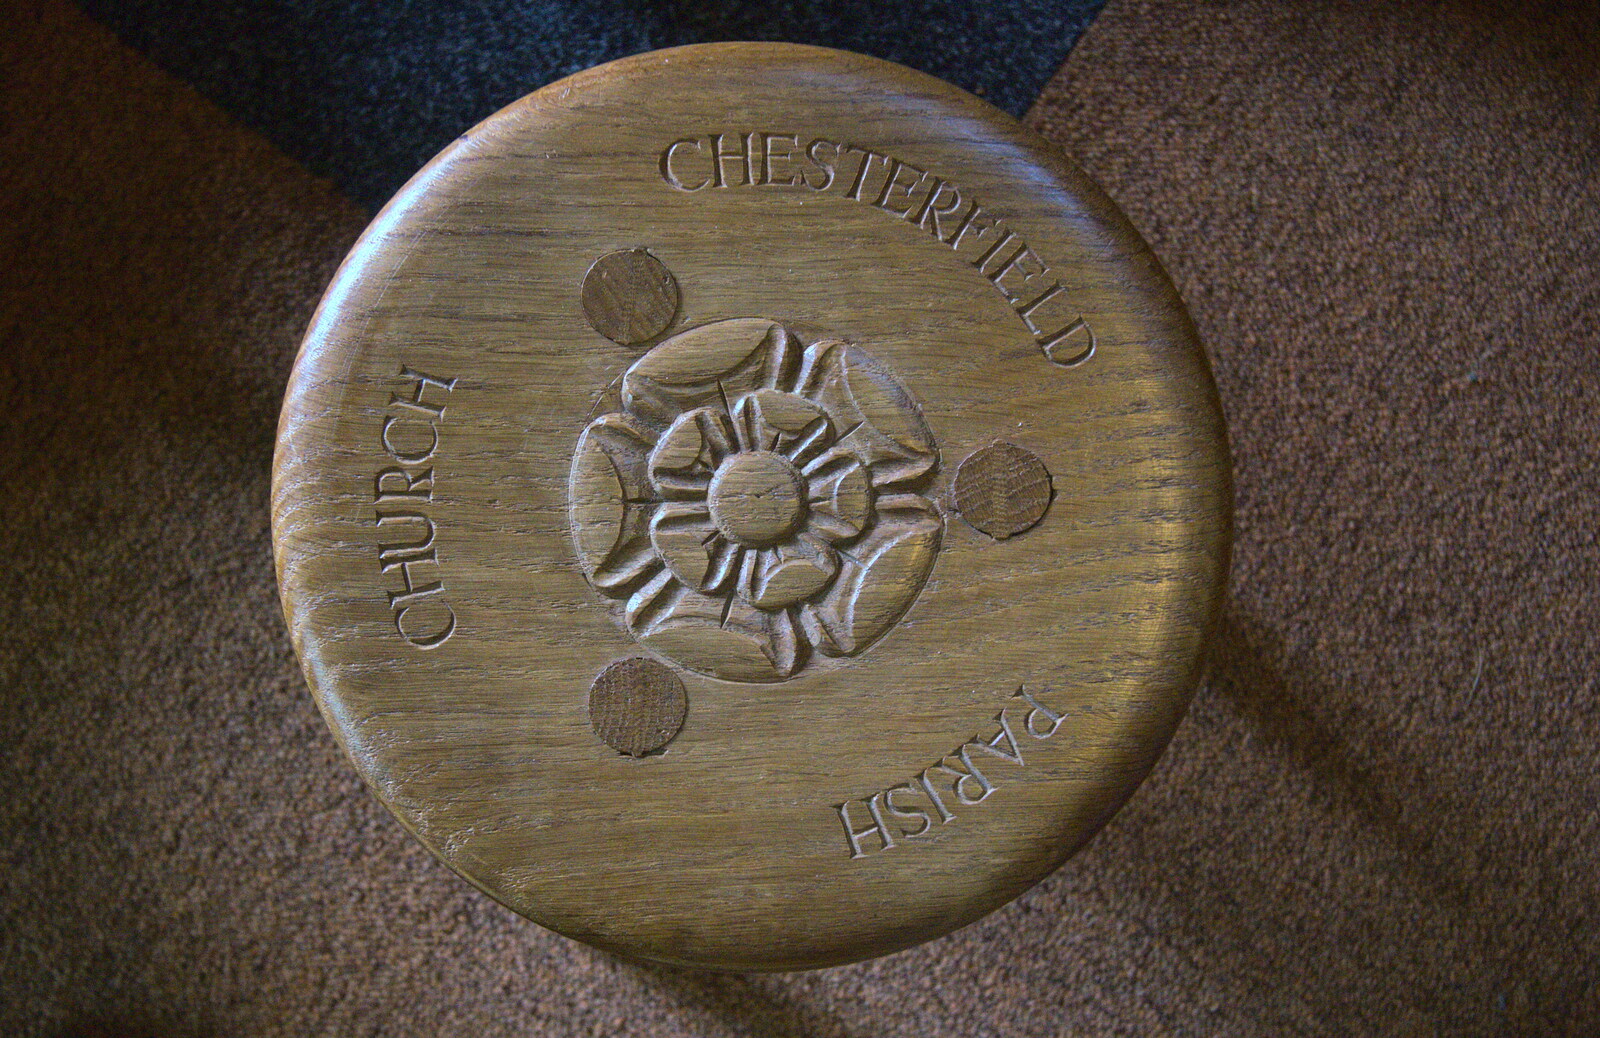 A nice little Chesterfield Parish Church stool from Chesterfield and the Twisty Spire, Derbyshire - 19th April 2013